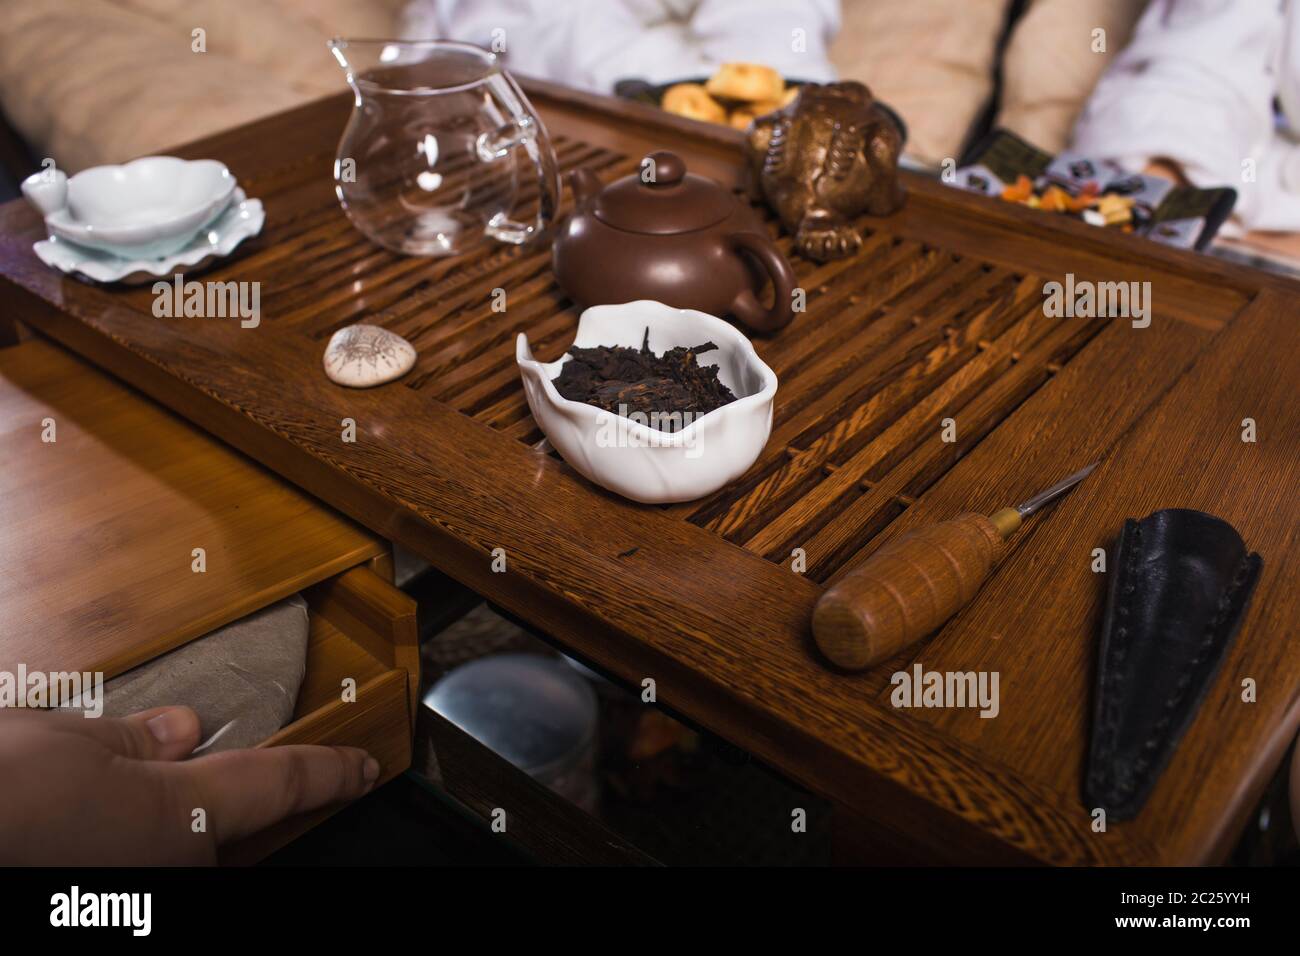 A wooden cutting board with a cake on a table Stock Photo